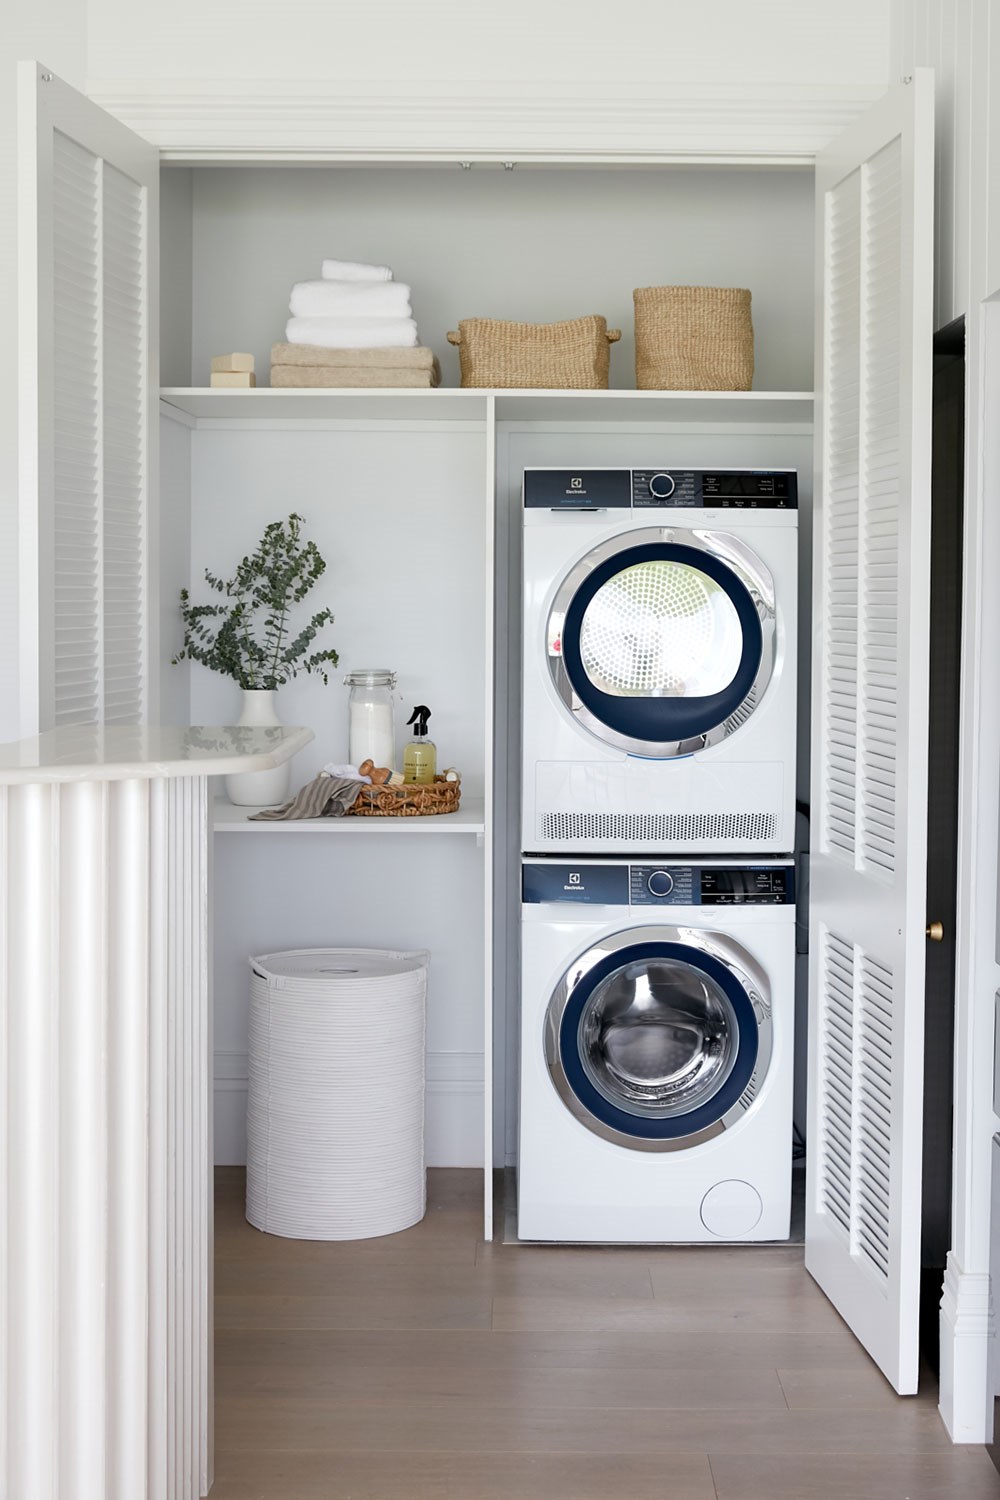 Three Birds Renovations laundry designs: 7 ideas to steal | Better ...